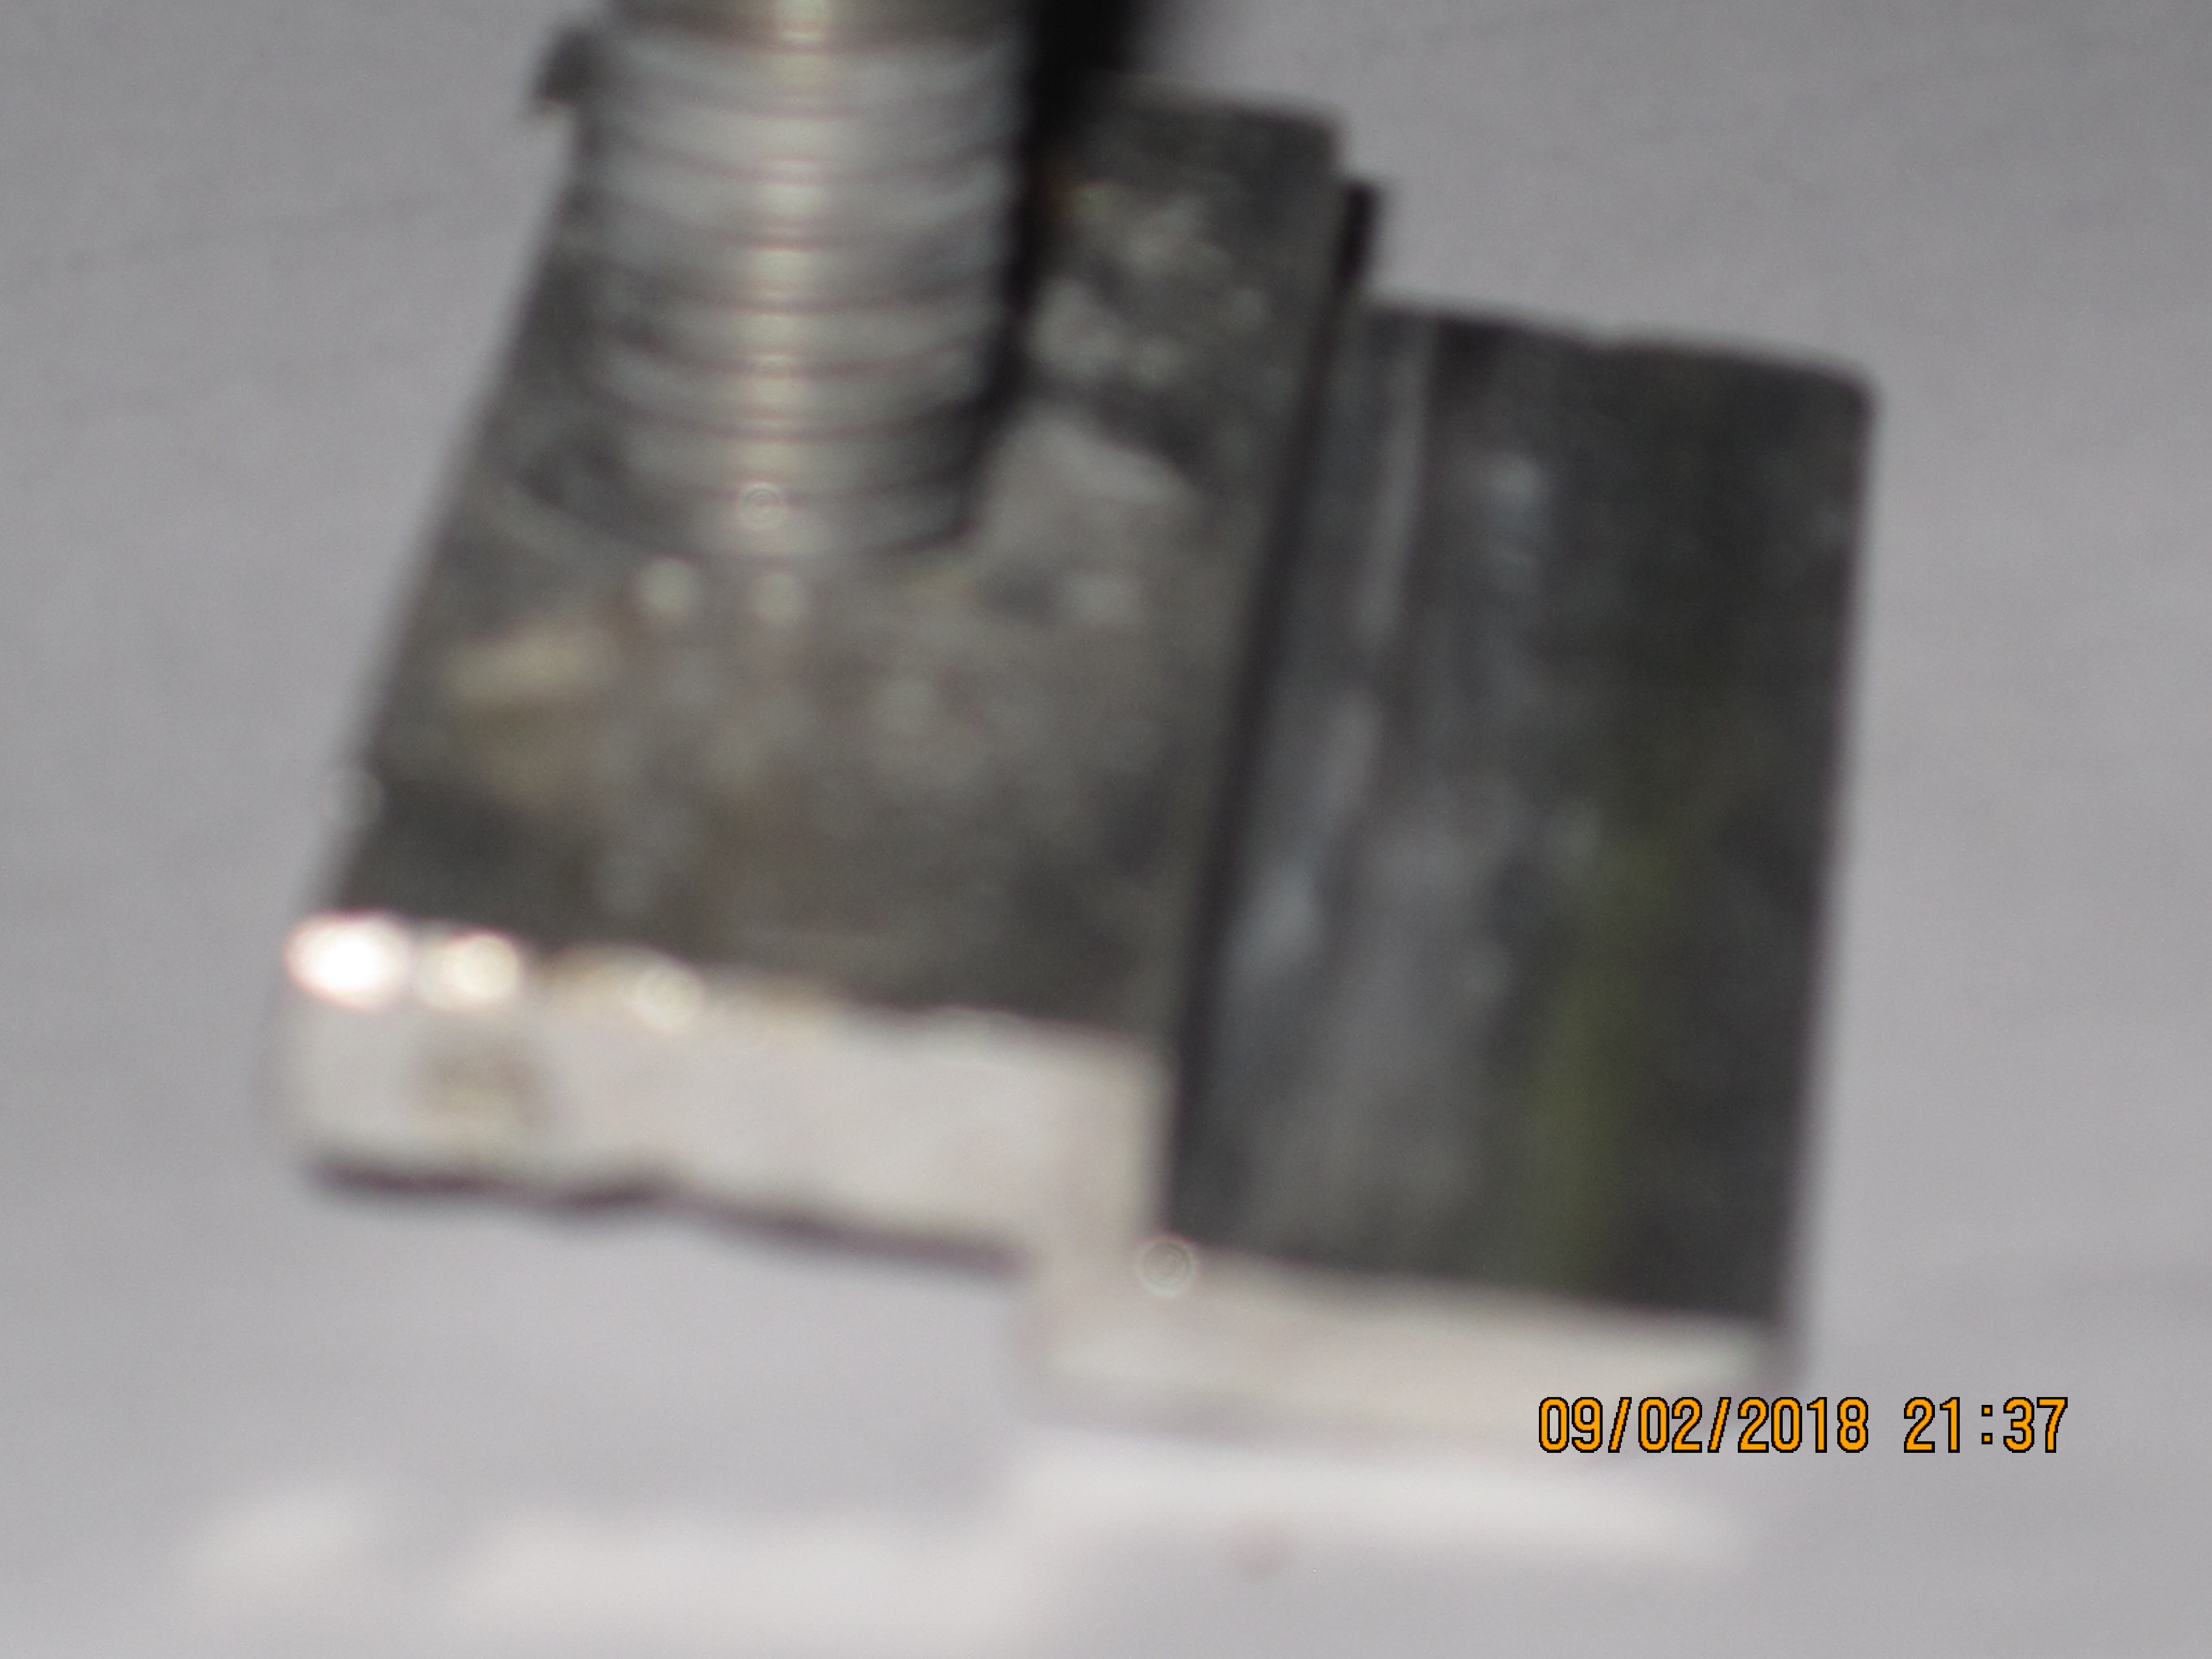 Name that mounting Clamp faulty pv clamp 002.JPG - EletriciansForums.net